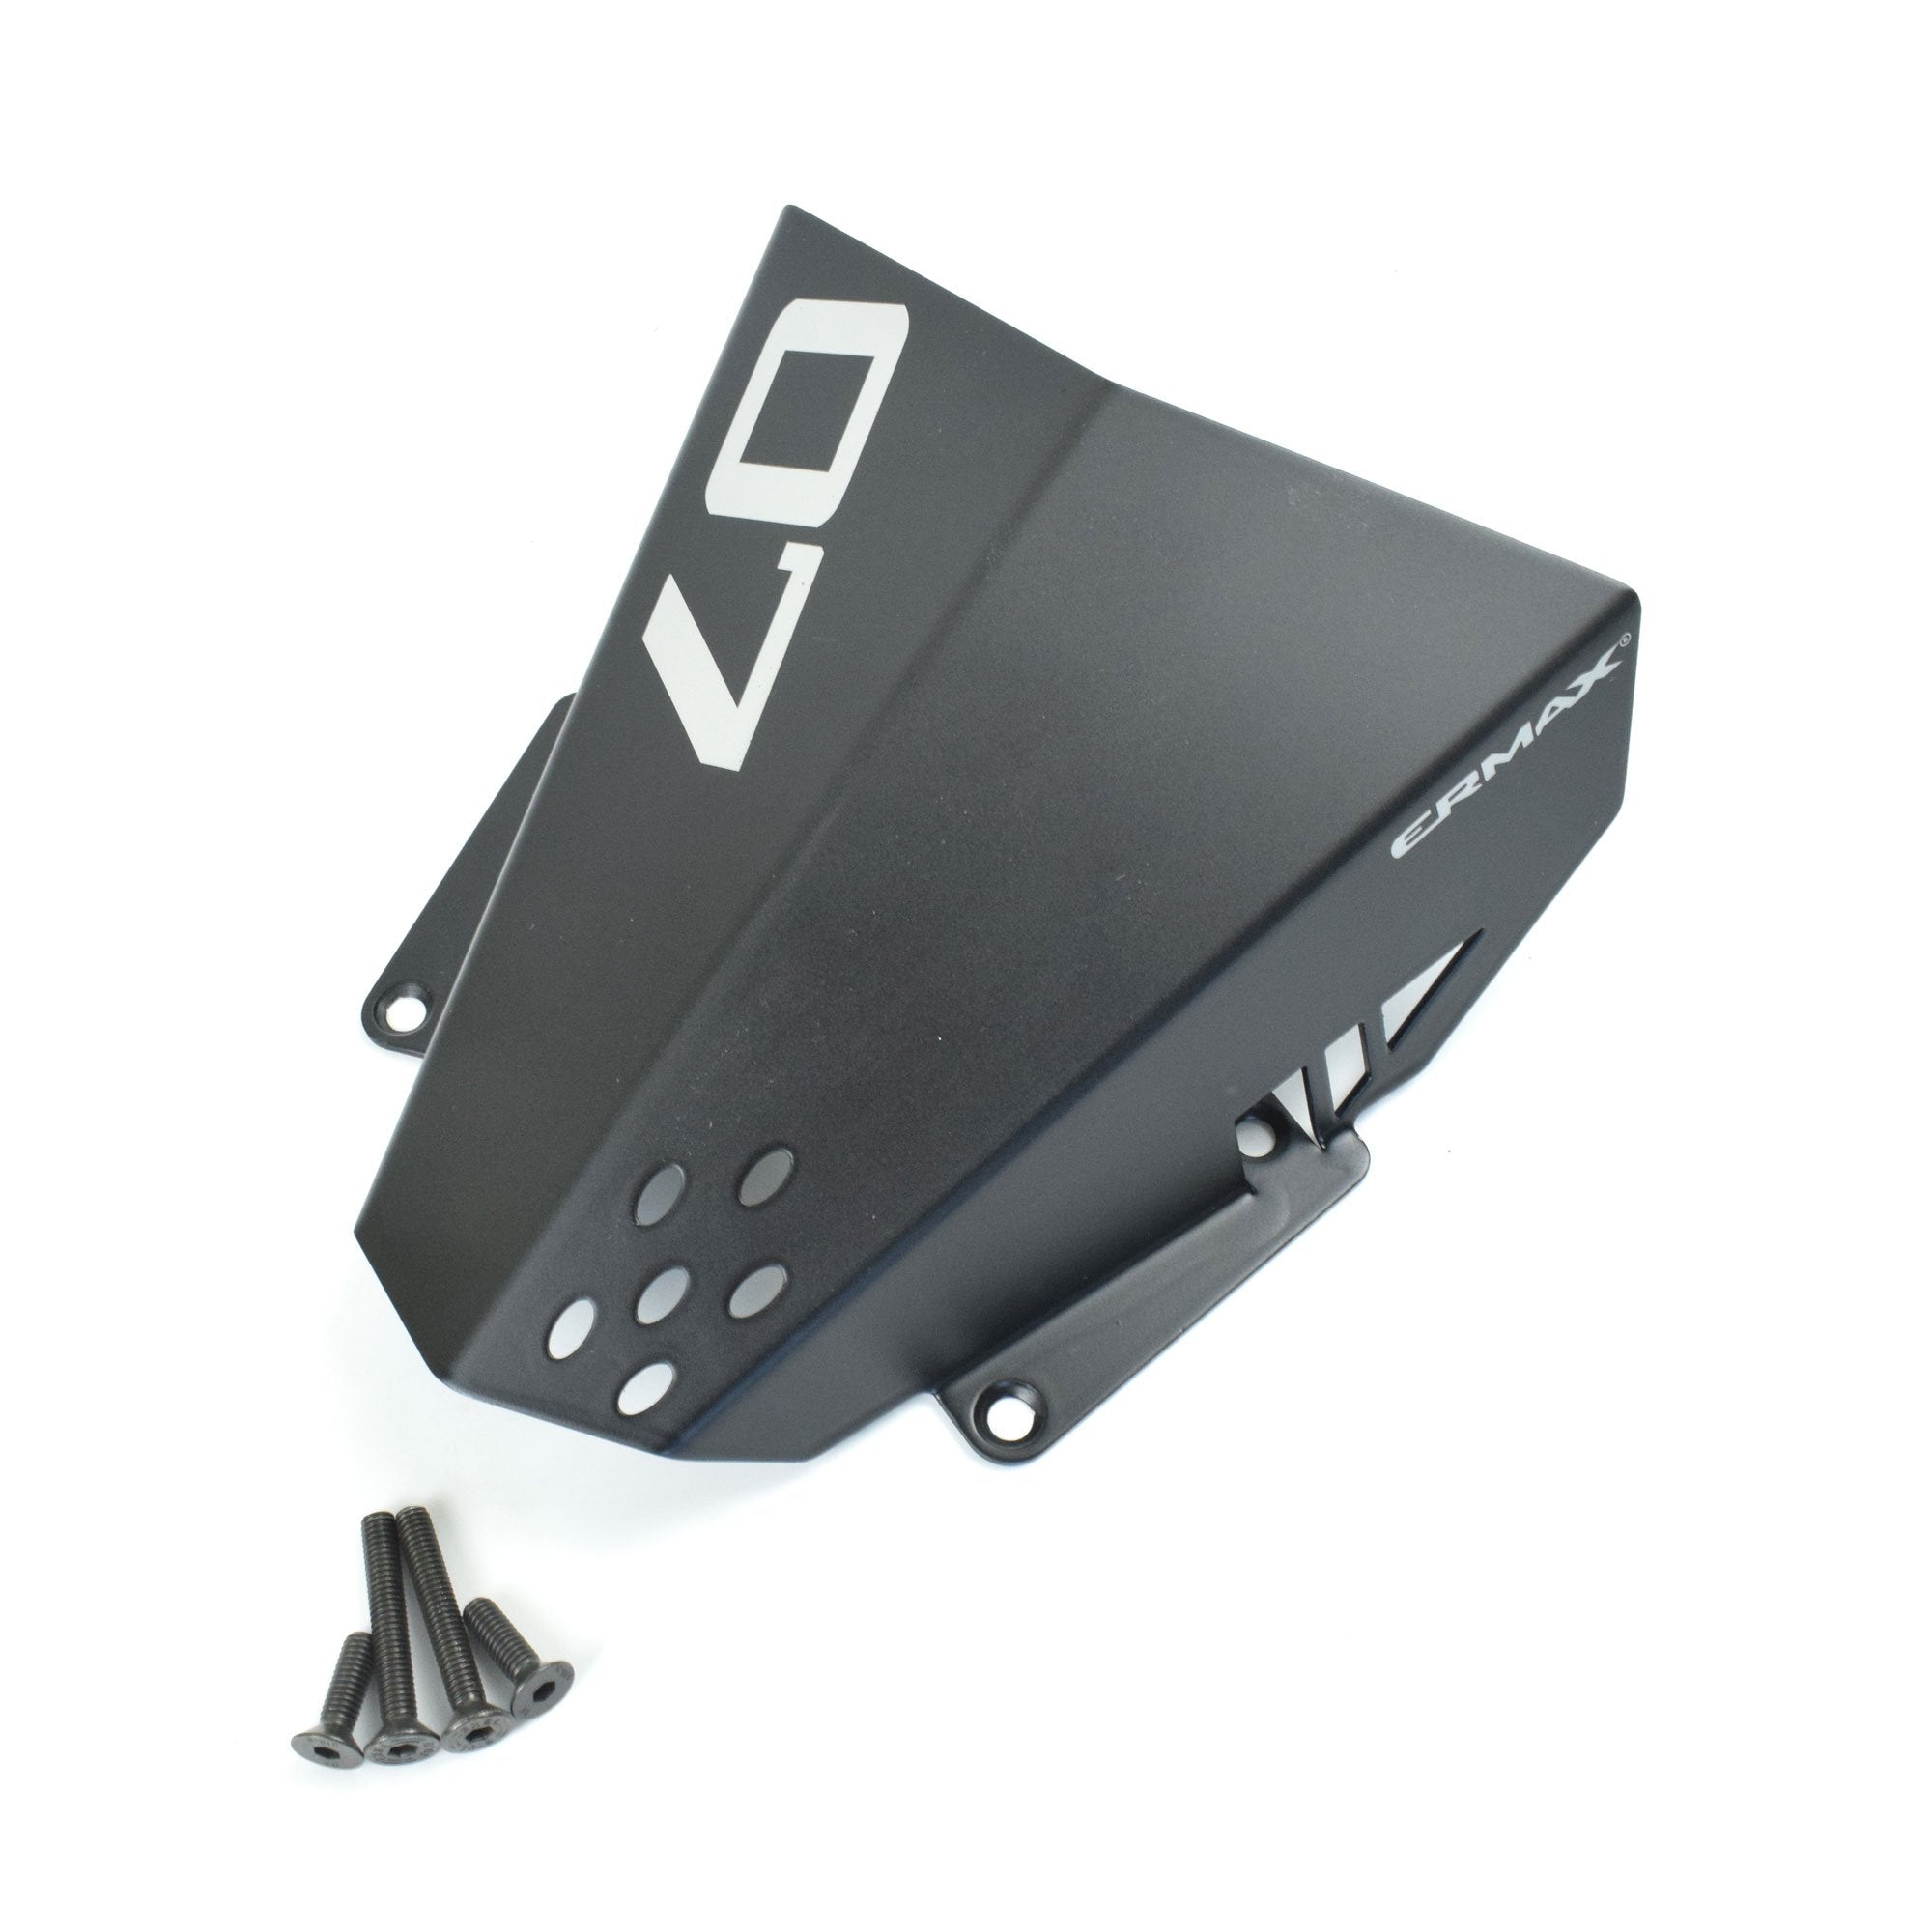 Ermax Fly Screen | Anodised Black | Yamaha MT-07 2018>2019-E0302ALY84-NO-Screens-Pyramid Motorcycle Accessories